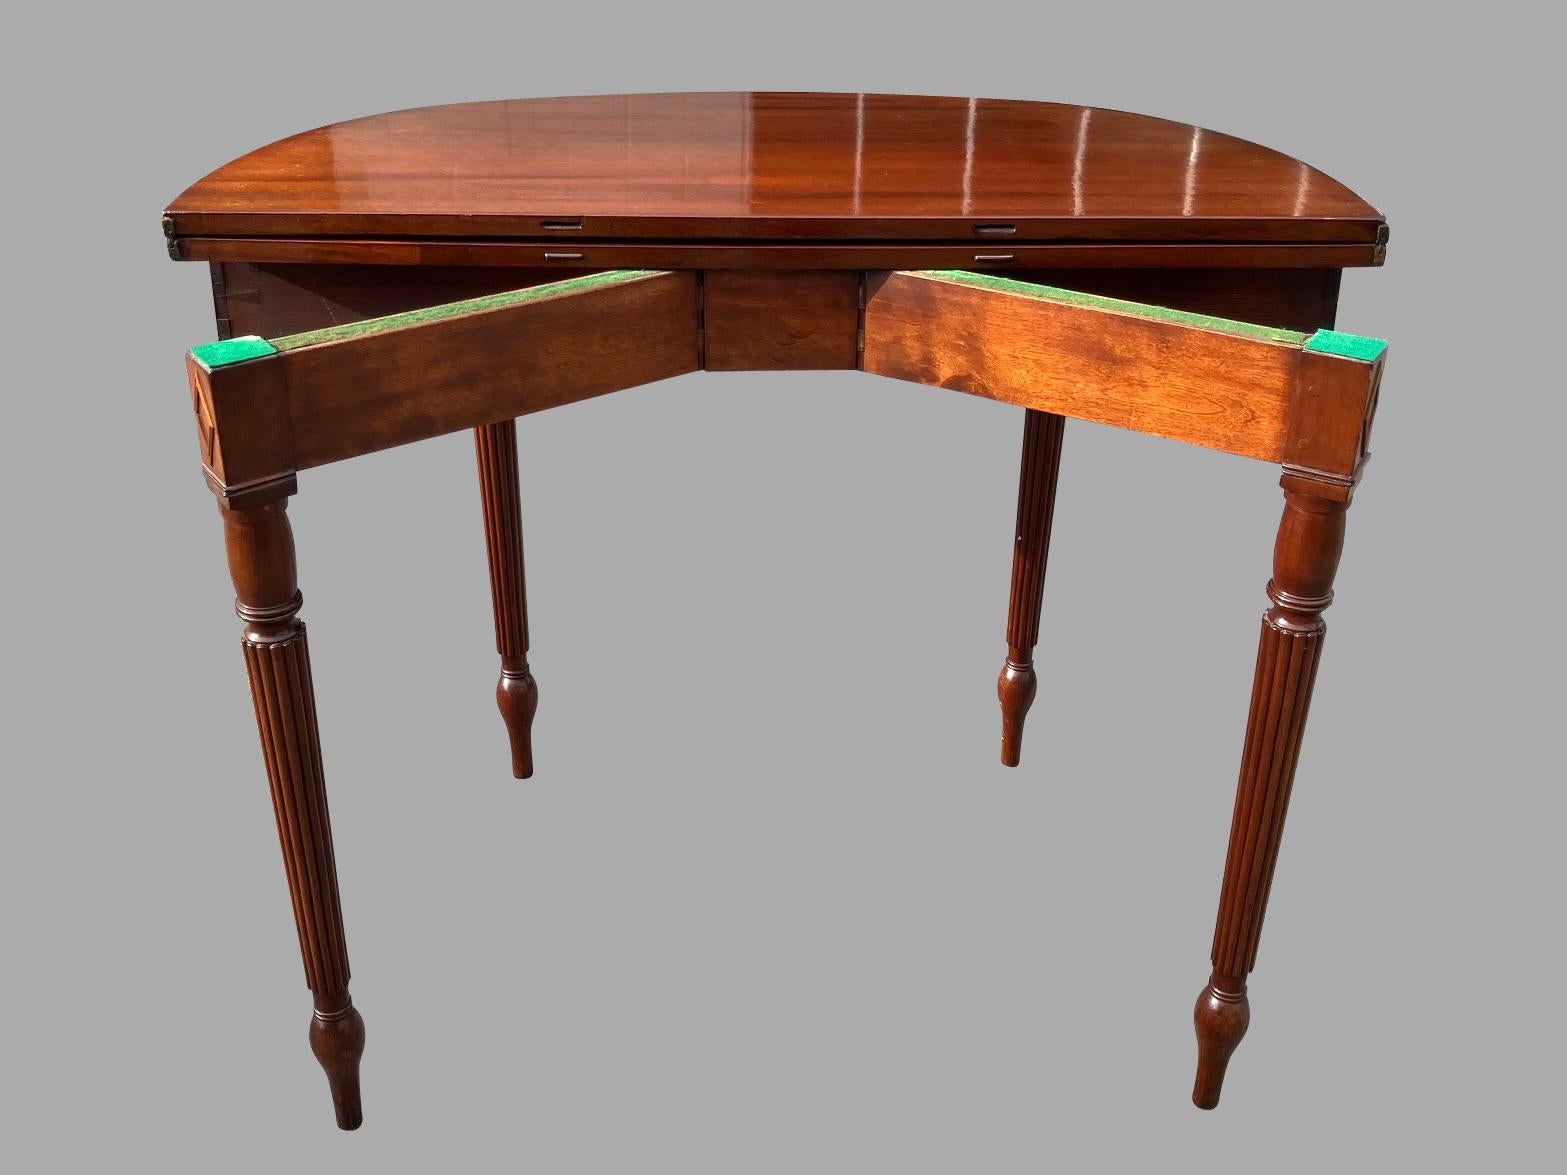 English Regency Period Mahogany Flip Top Game or Tea Table with Reeded Legs For Sale 6